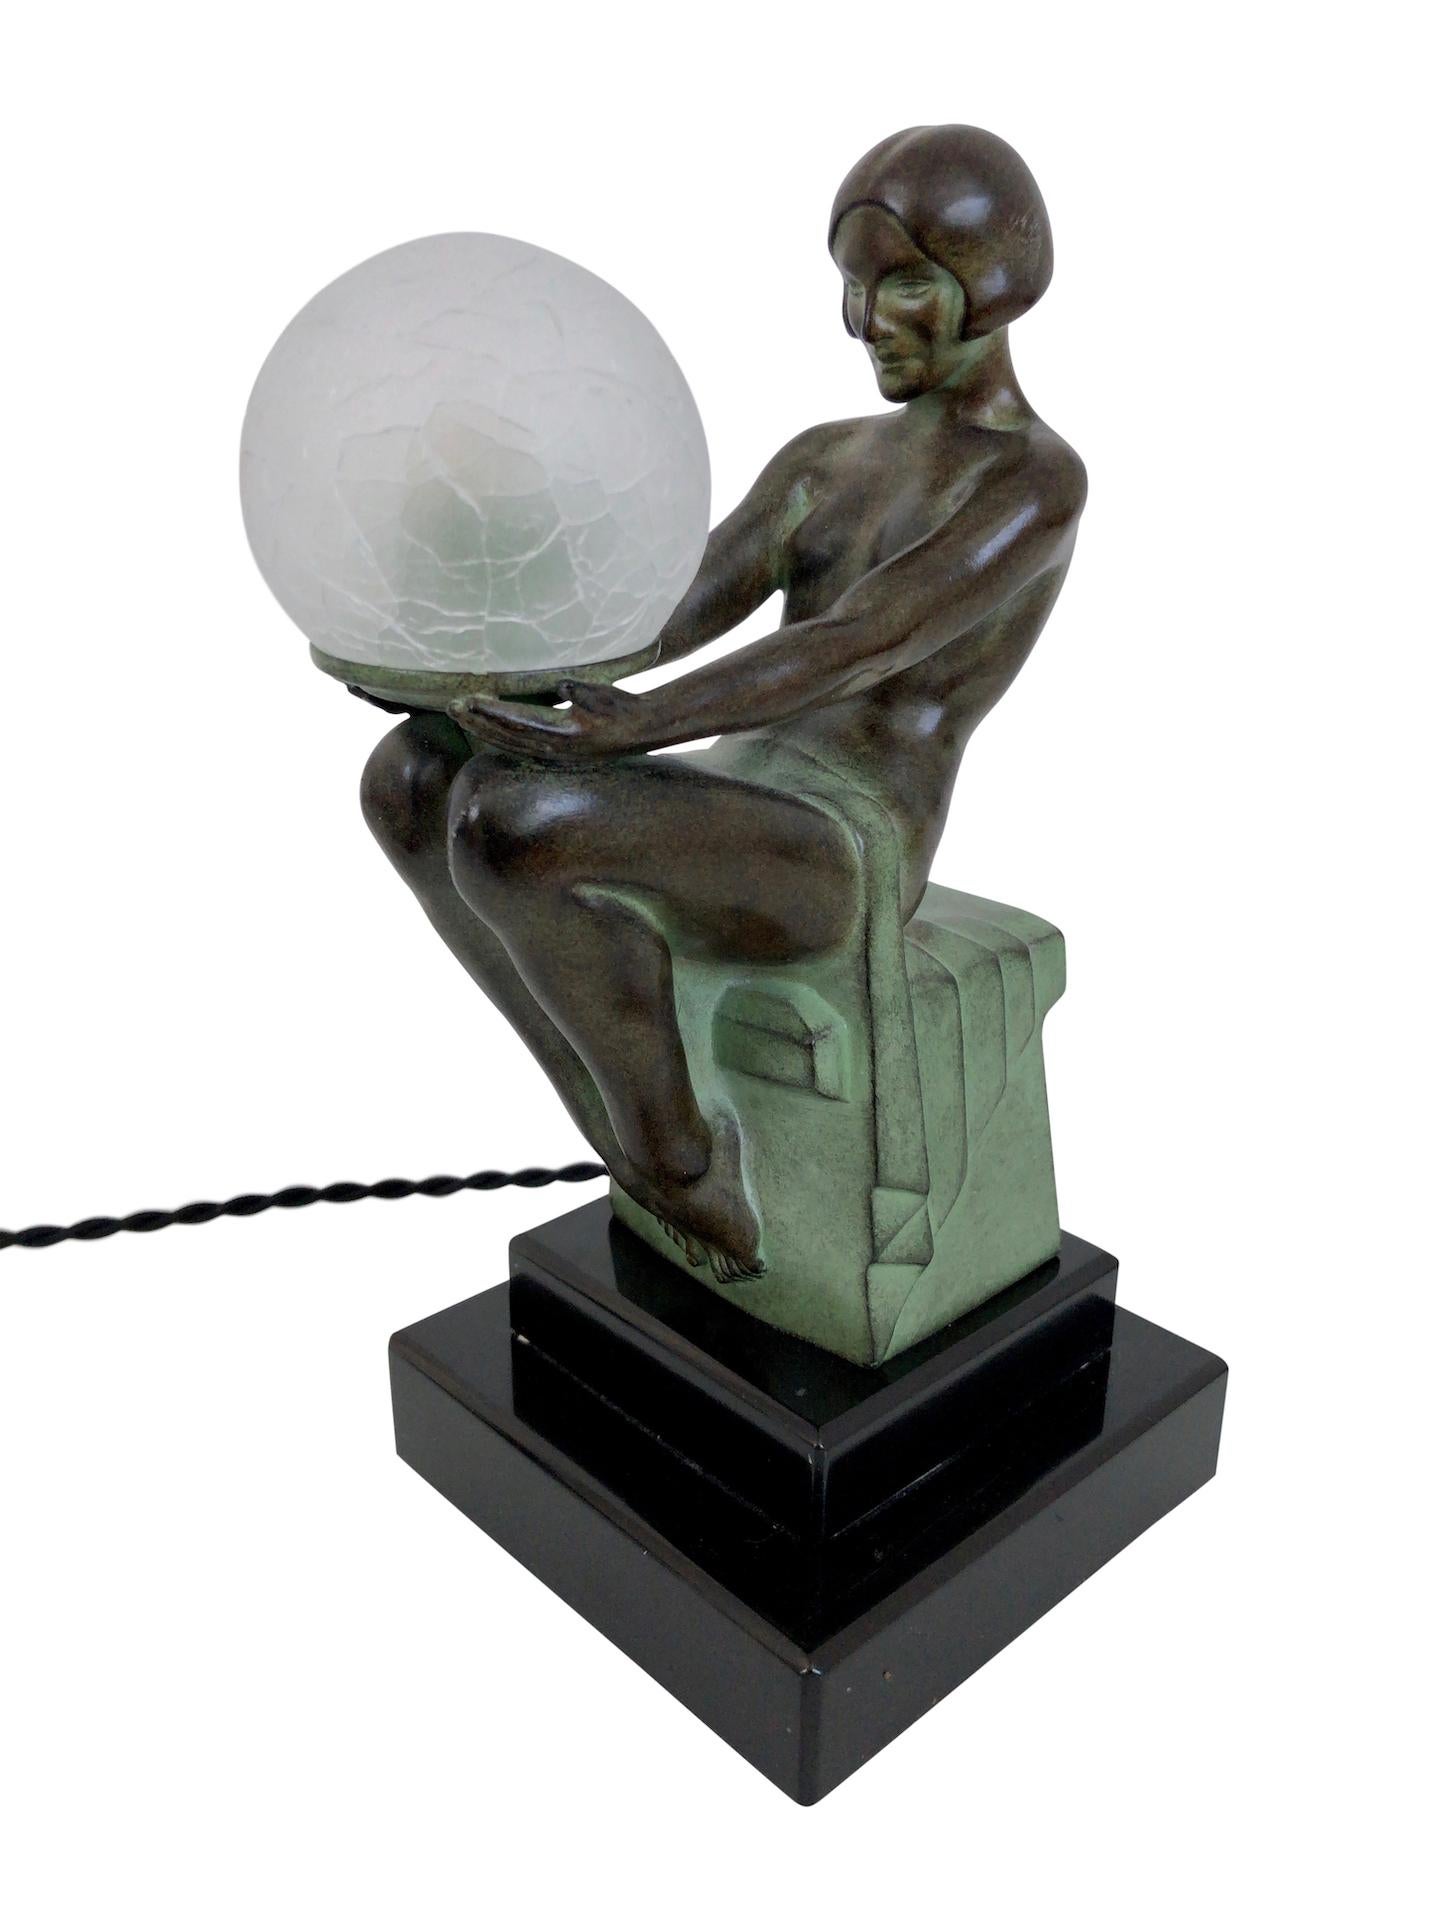 Contemporary Delassement Lumineux French Art Deco Style Nude Sculpture Lamp by Max Le Verrier